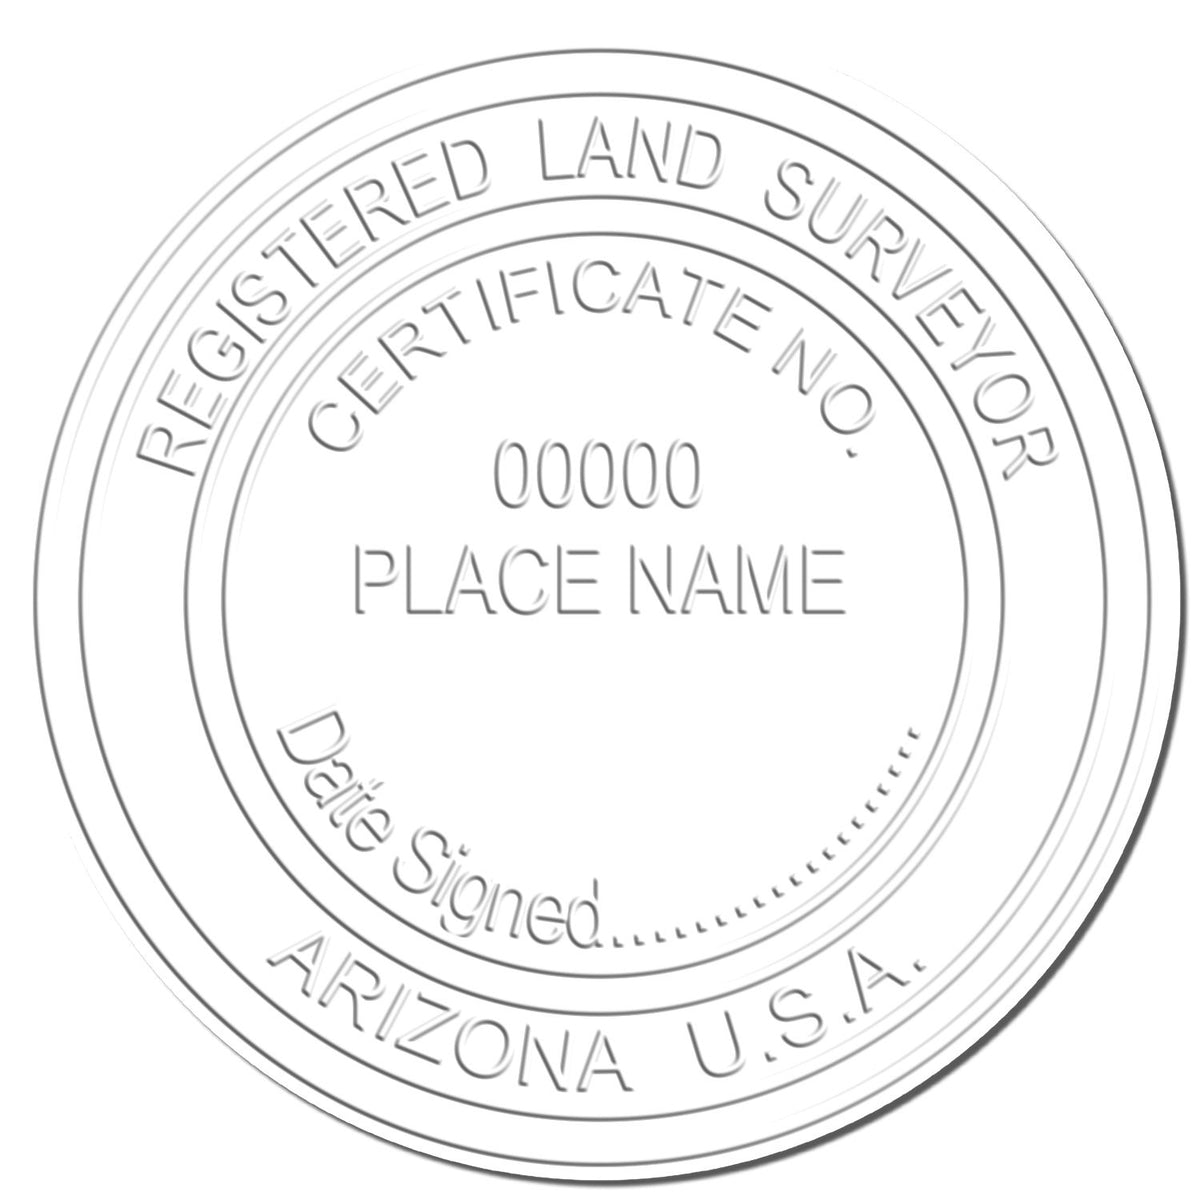 This paper is stamped with a sample imprint of the Extended Long Reach Arizona Surveyor Embosser, signifying its quality and reliability.